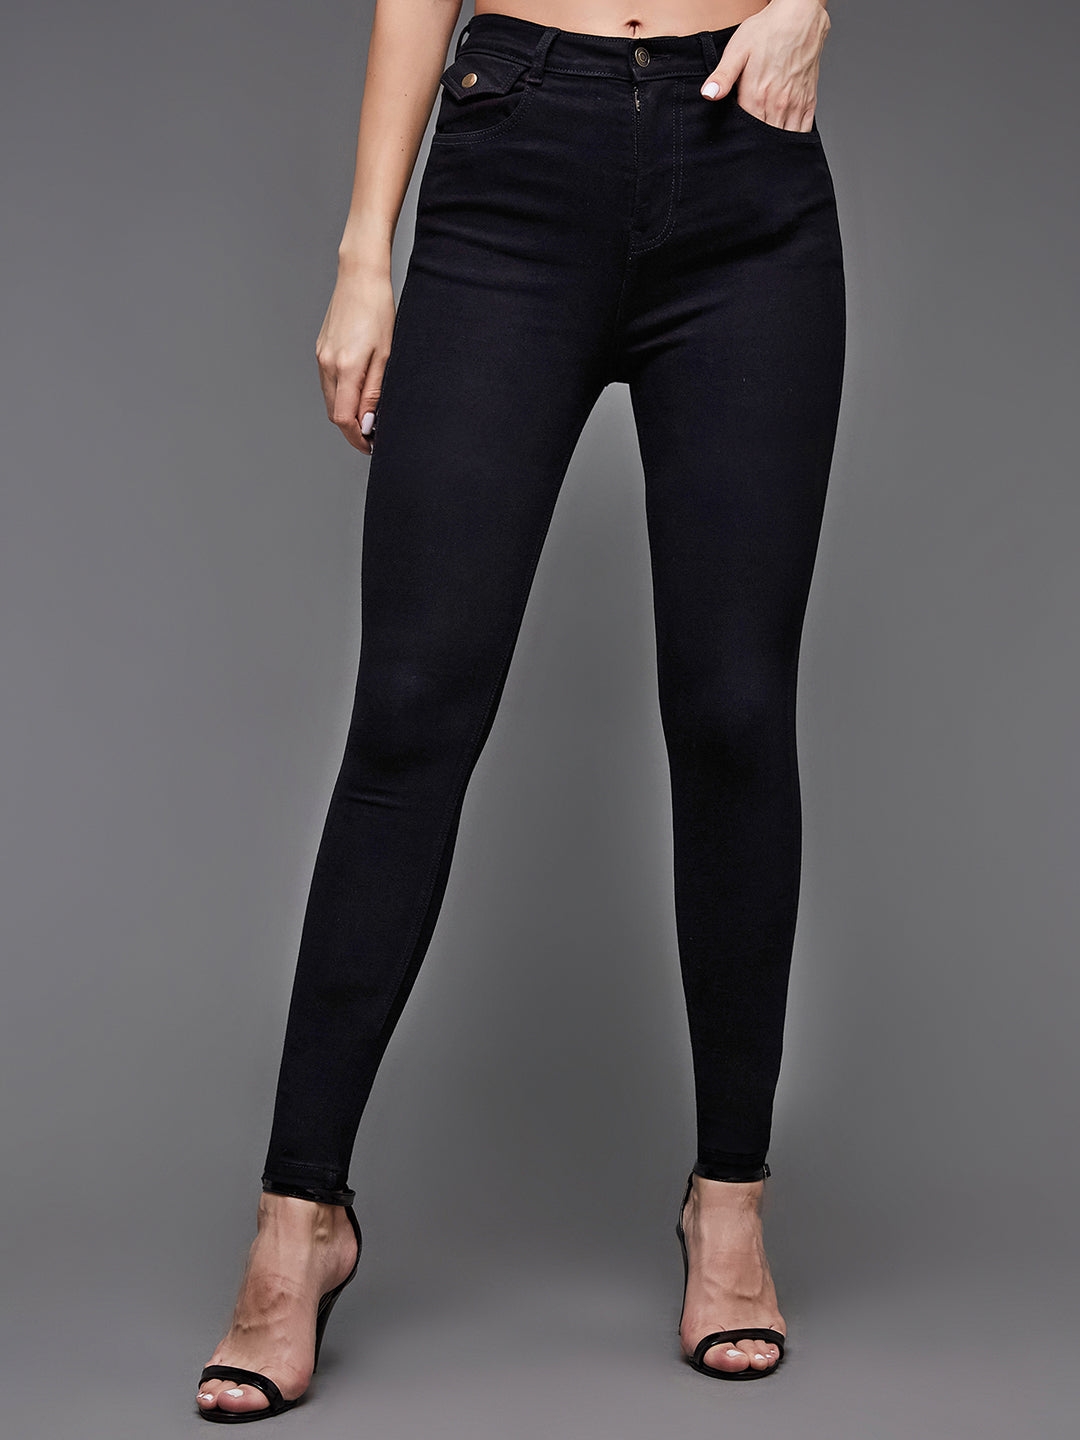 MISS CHASE | Black Skinny High Rise Clean Look Regular-Length Stretchable Denim Jeans